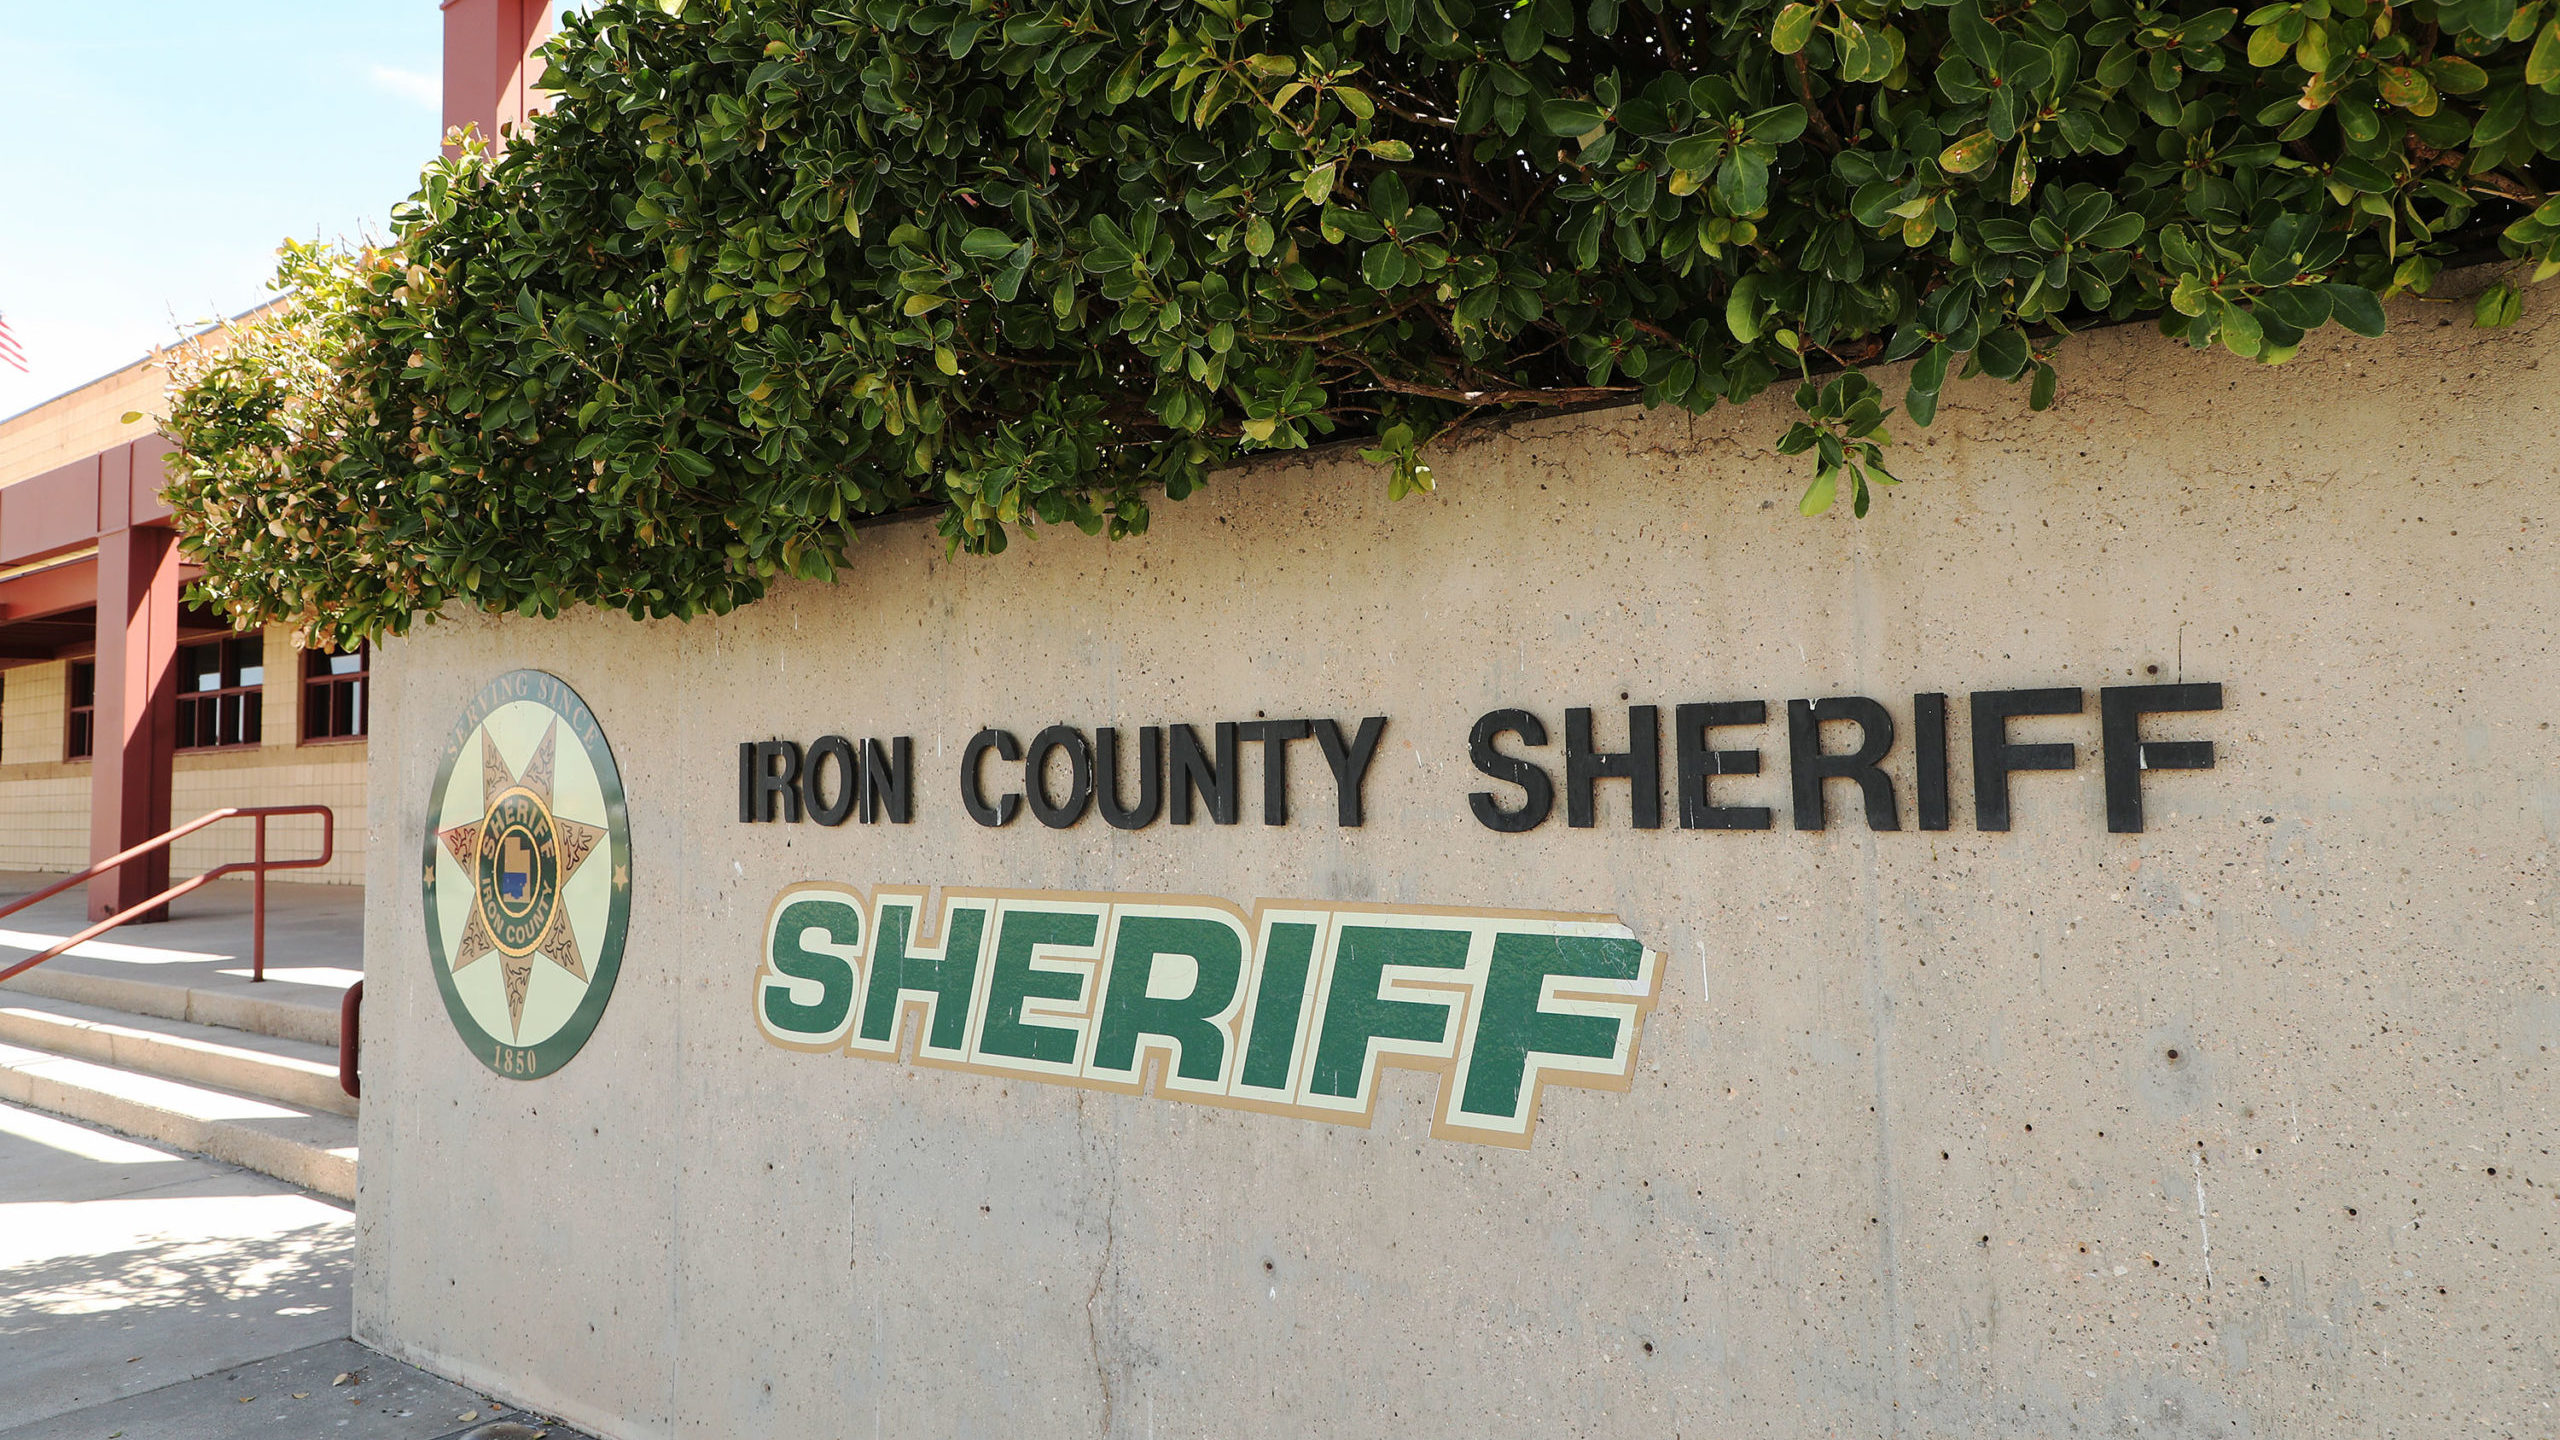 Iron County Sheriff's Office in Cedar City is pictured on Wednesday April 7, 2021. The Iron County ...